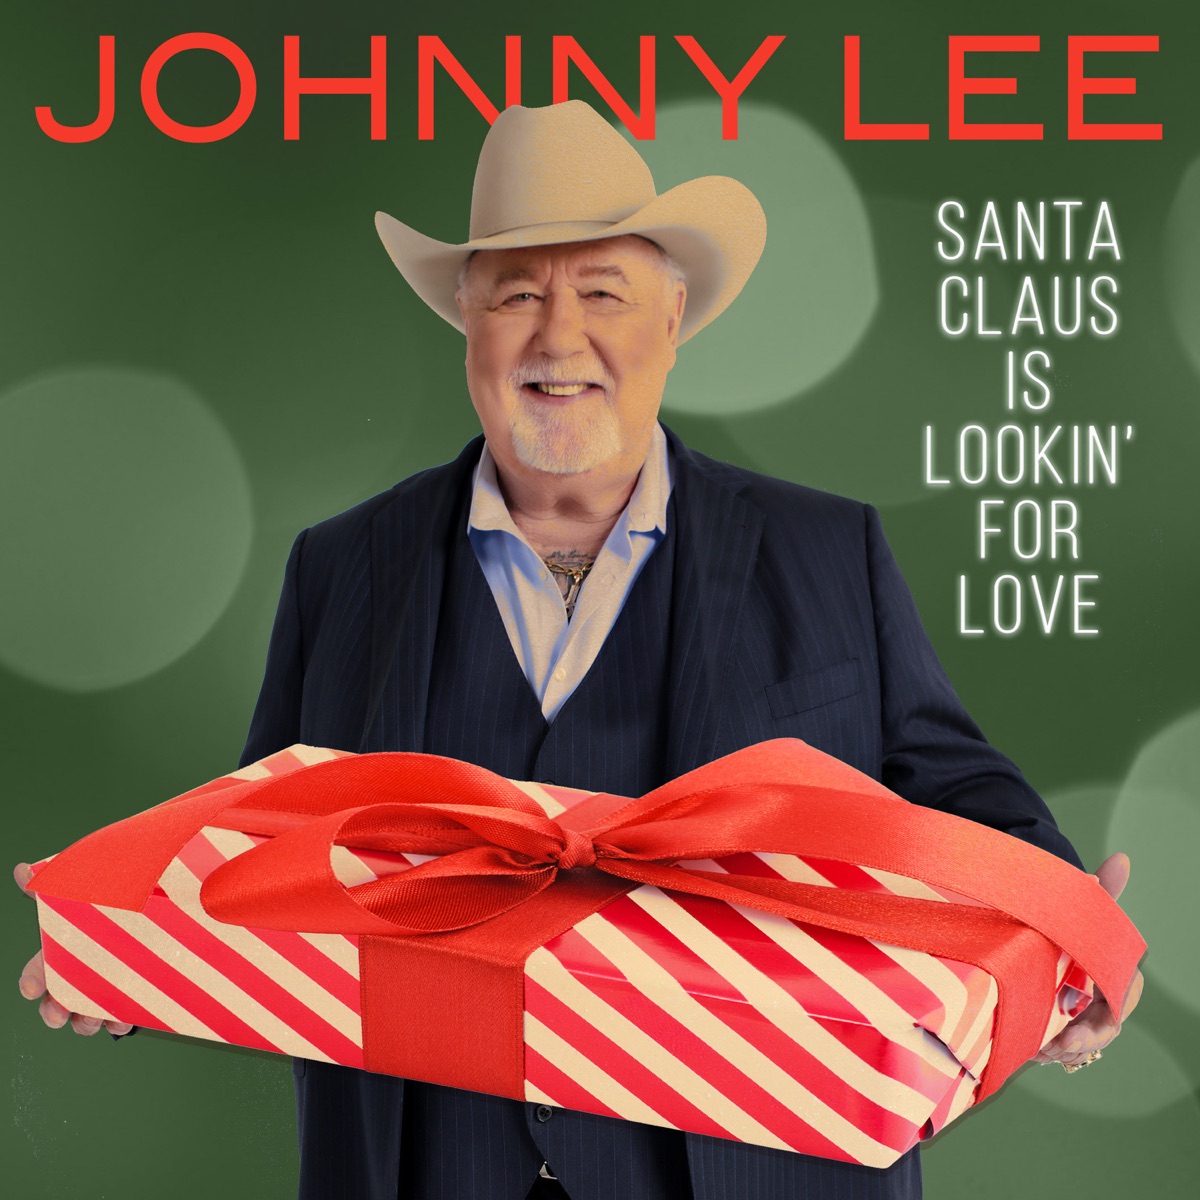 Johnny Lee: Greatest Hits by Johnny Lee on Apple Music